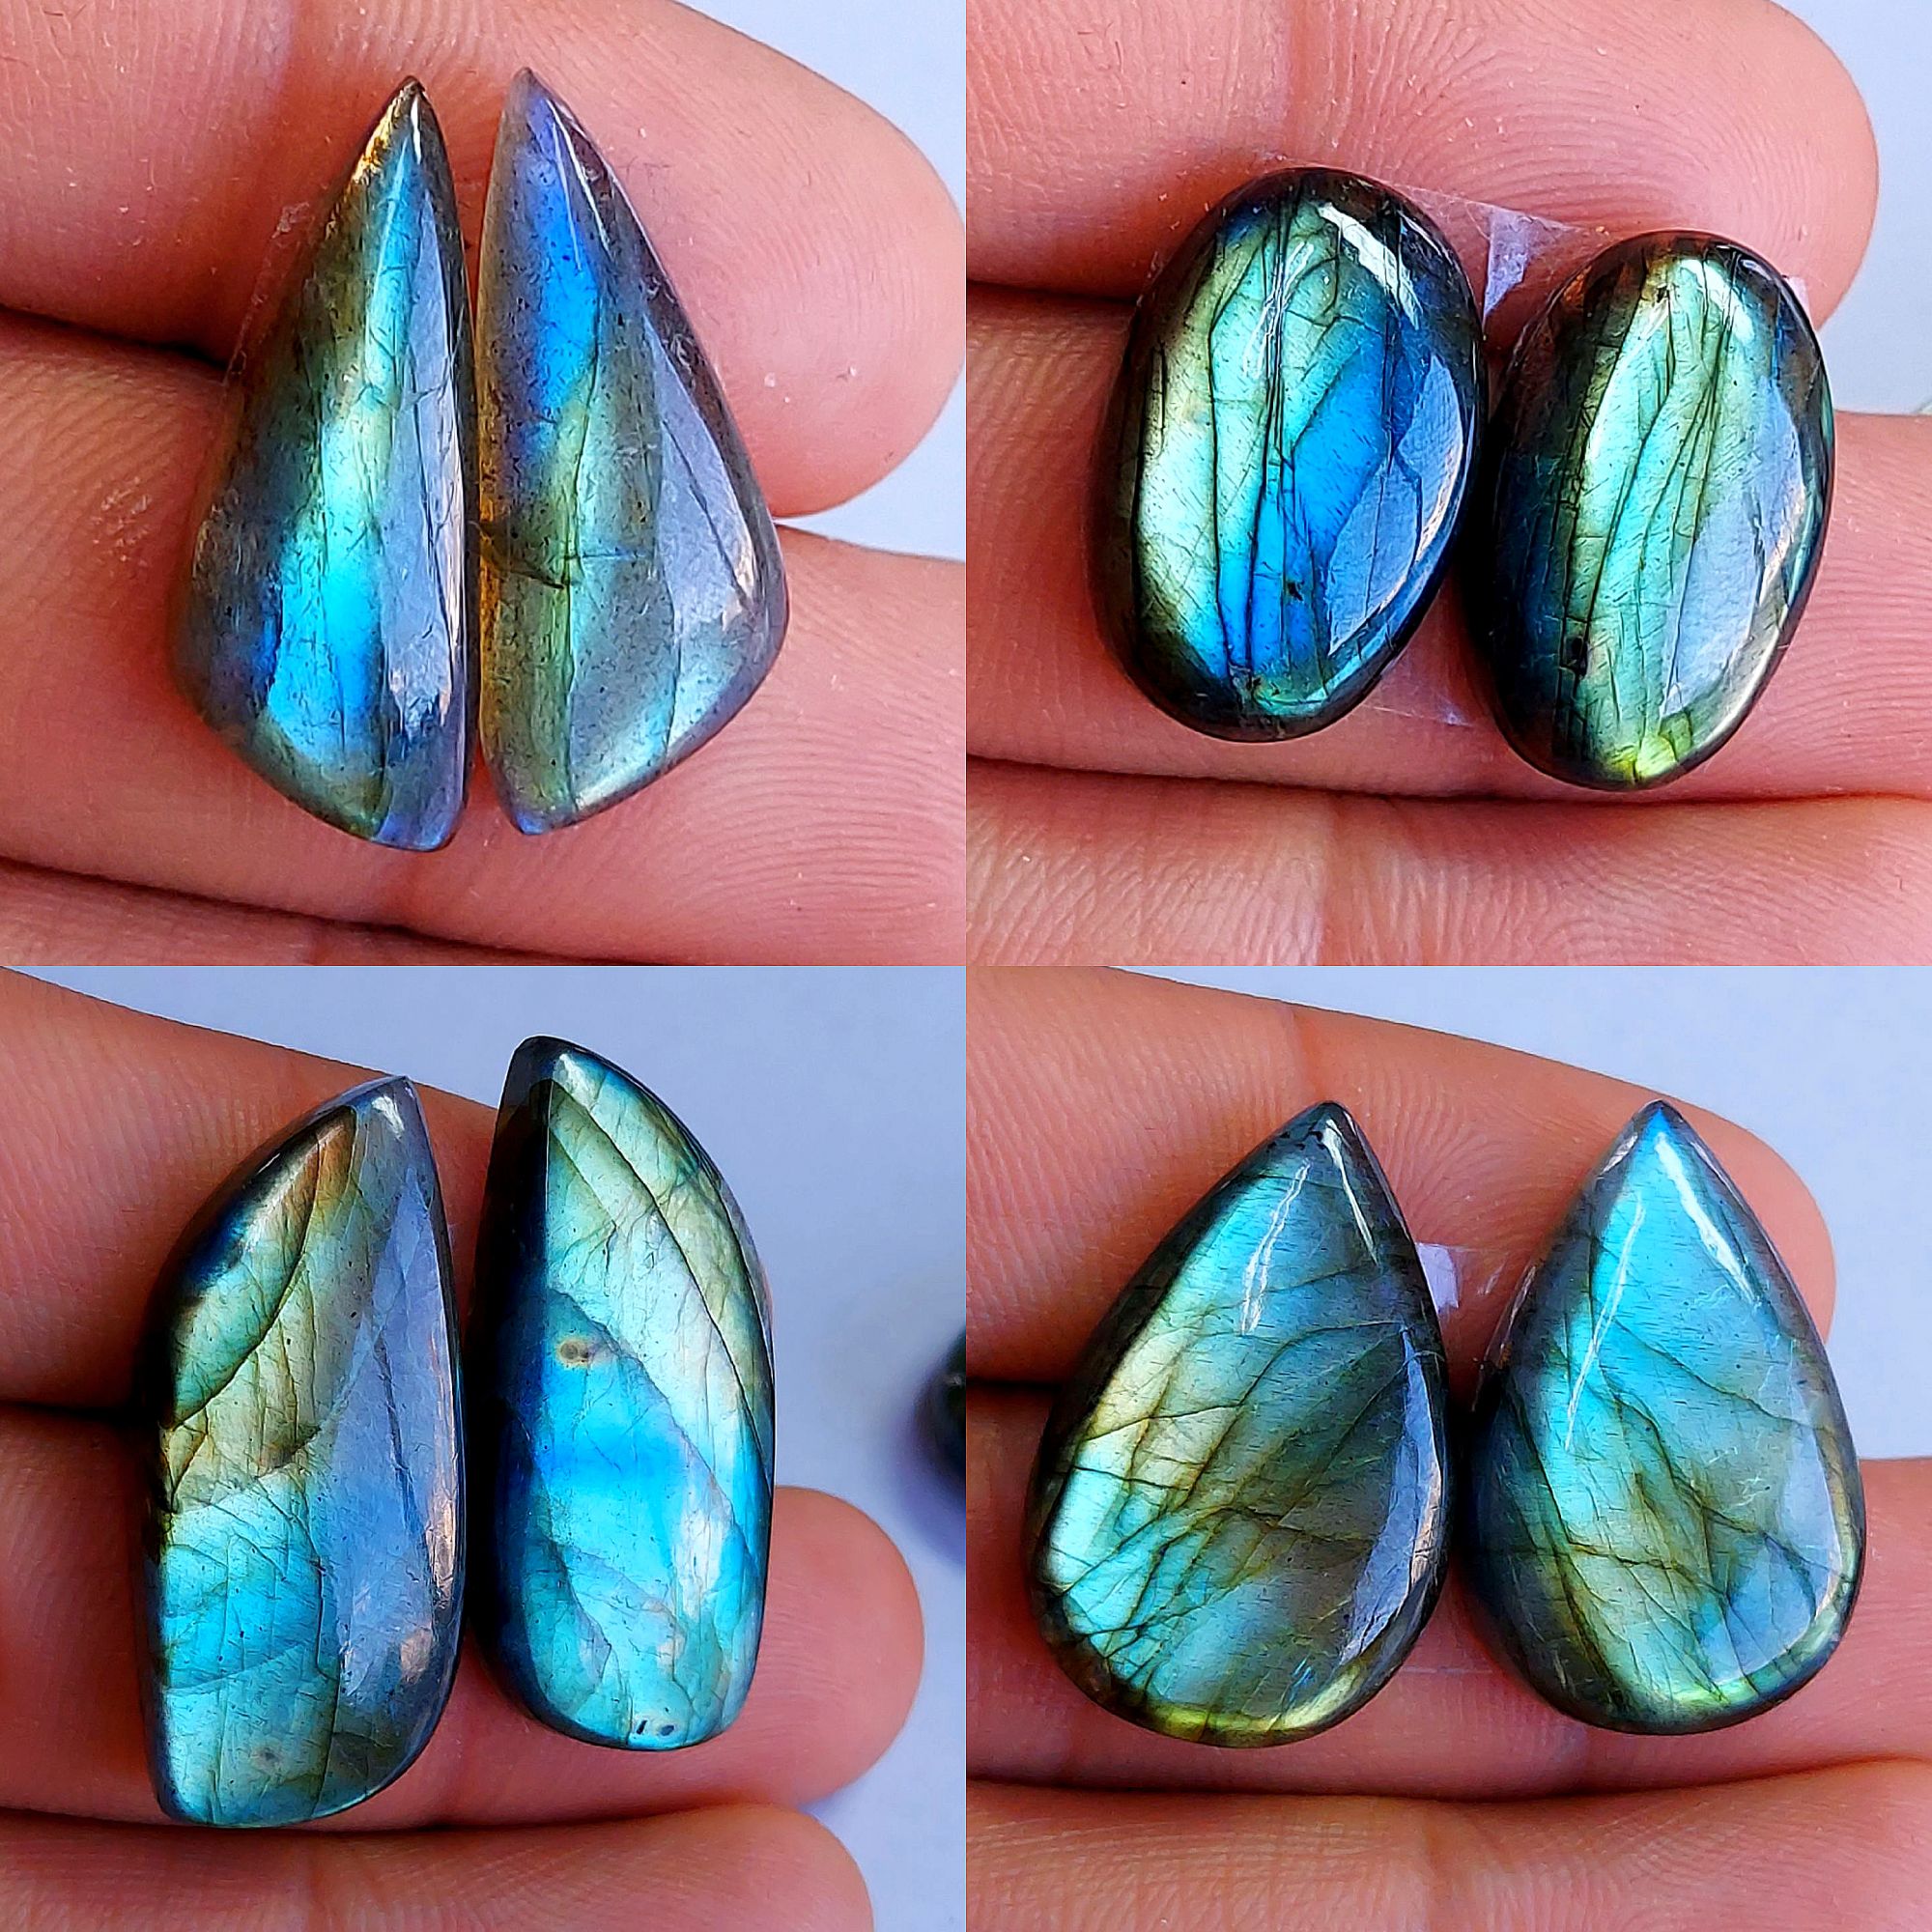 4 Pairs lot 140Cts Natural Labradorite cabochon pair lot for jewelry making loose gemstone lot mix shape and size earring pairs 29x13 23x8mm